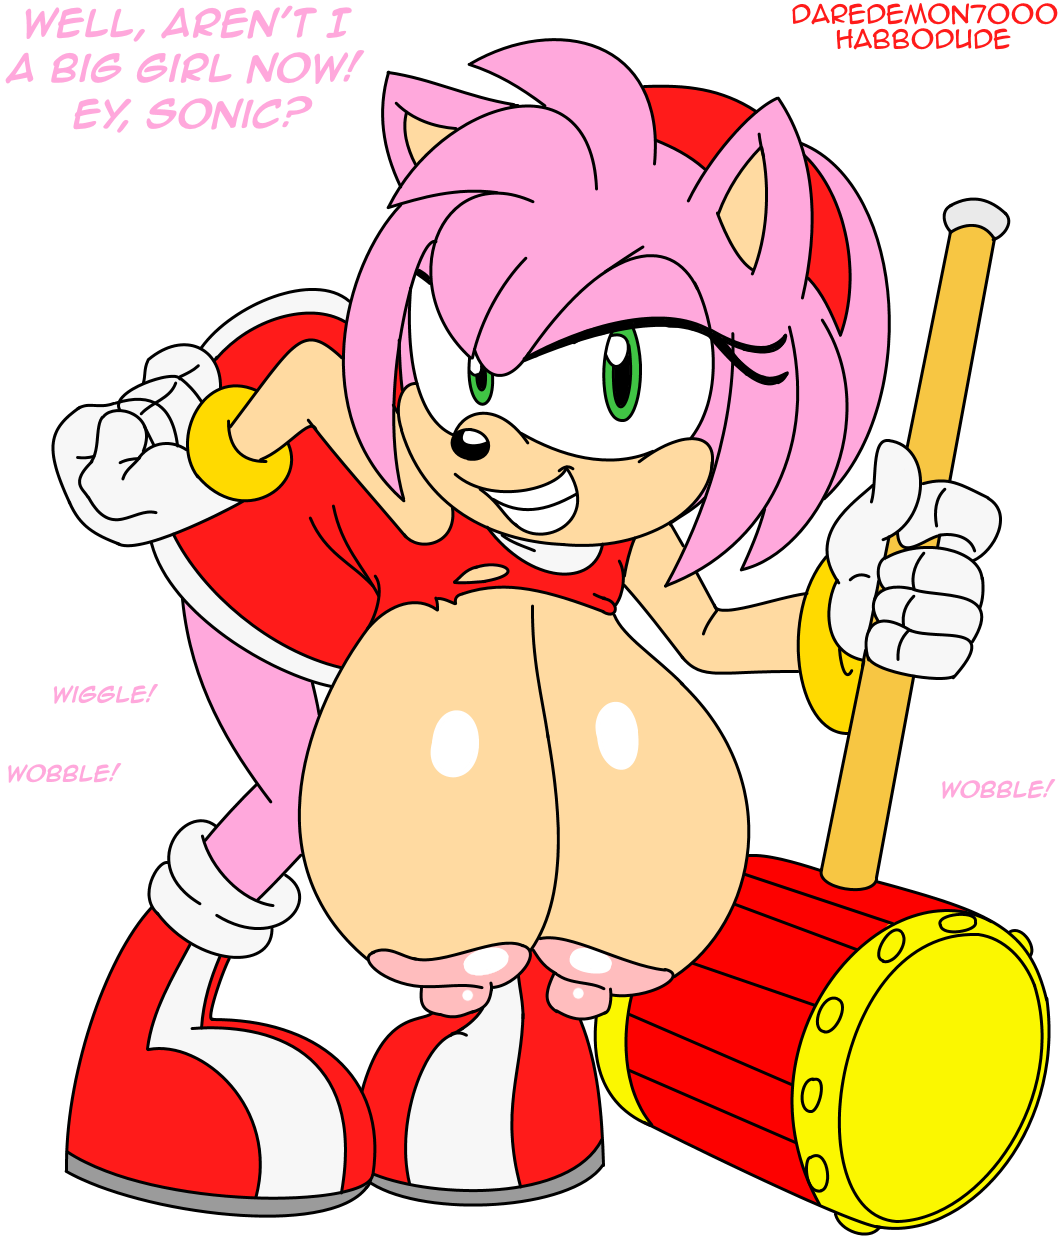 1girl amy_rose big_breasts big_nipples breast_expansion breasts clothes daredemon7000 erect_nipples gift grin habbodude hammer happy hedgehog looking_at_viewer nipples sega sonic text